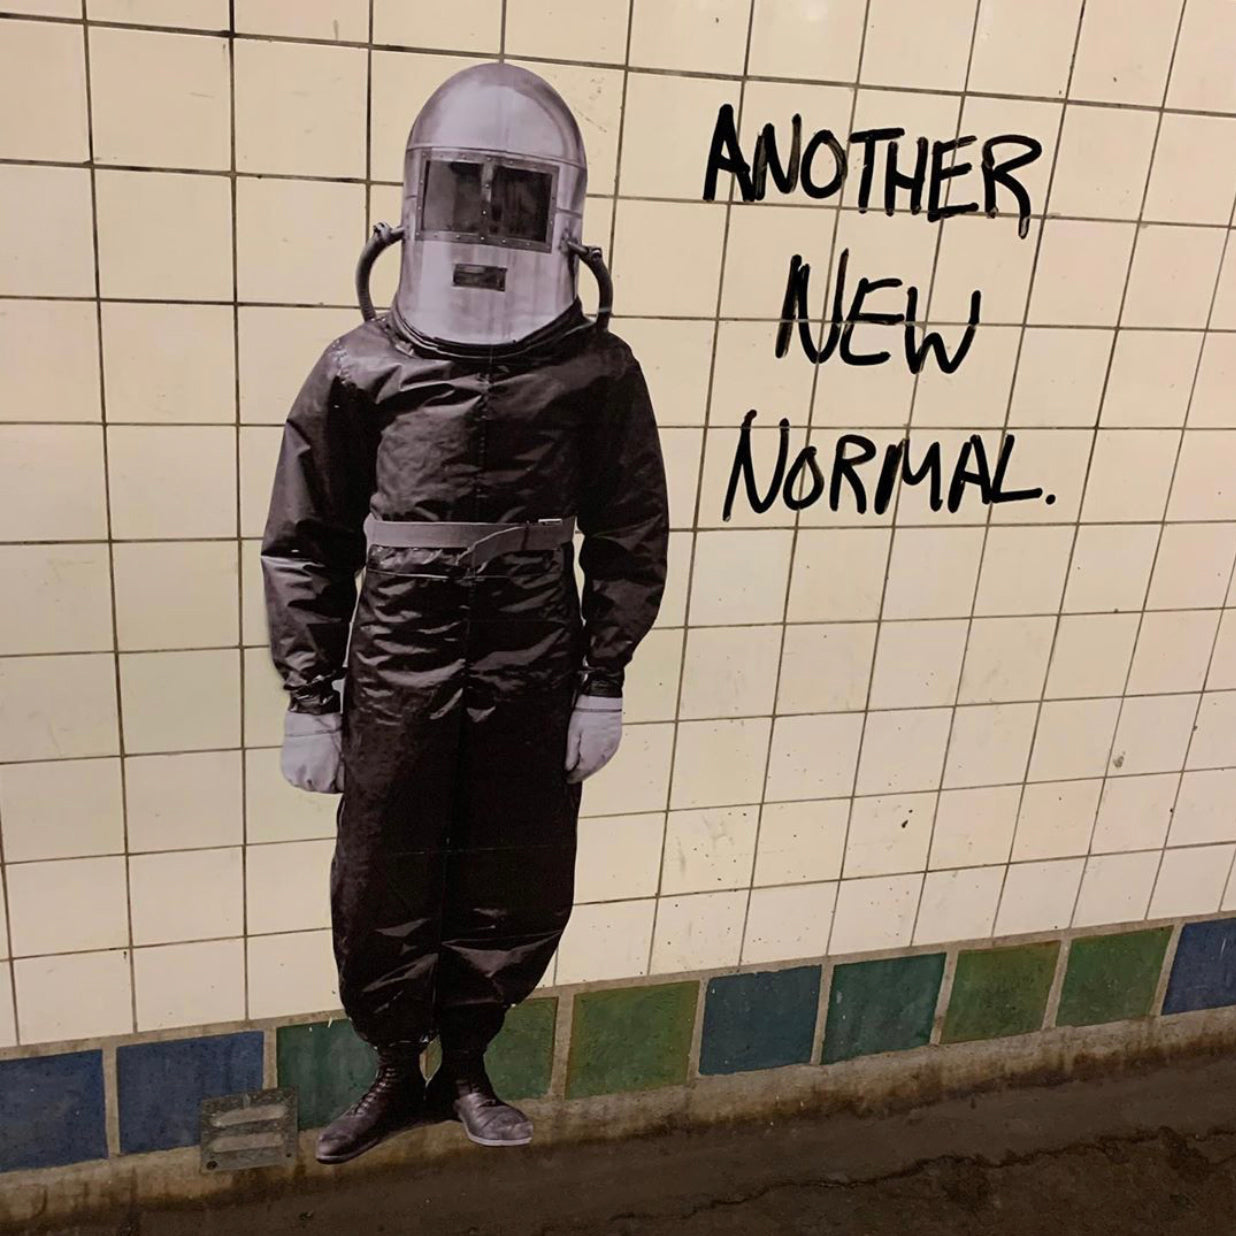 The best NYC street art inspired by our surreal times